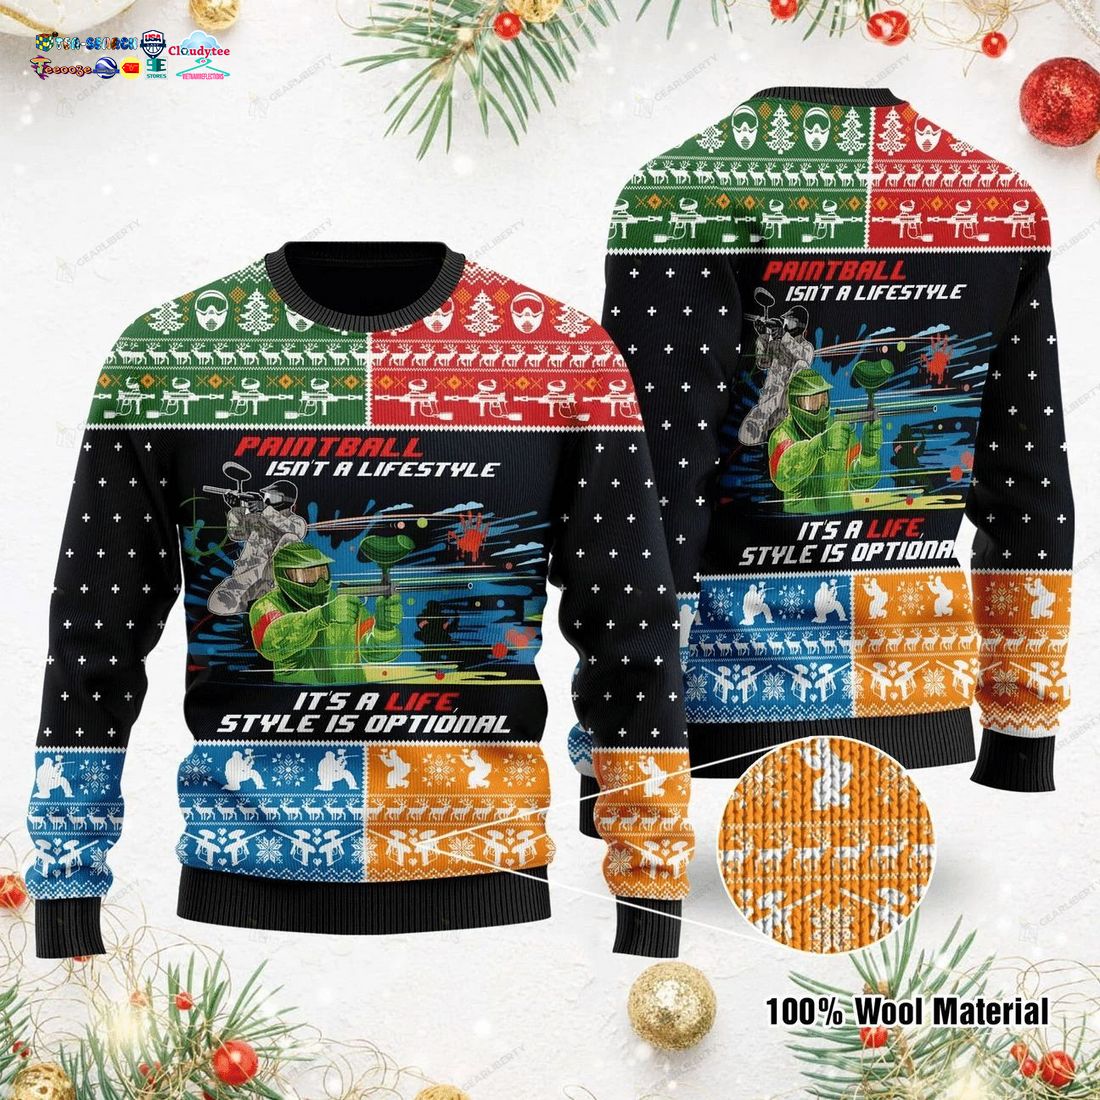 Paintball Isn’t A Lifestyle It’s A Life Style Is Optional Ugly Christmas Sweater